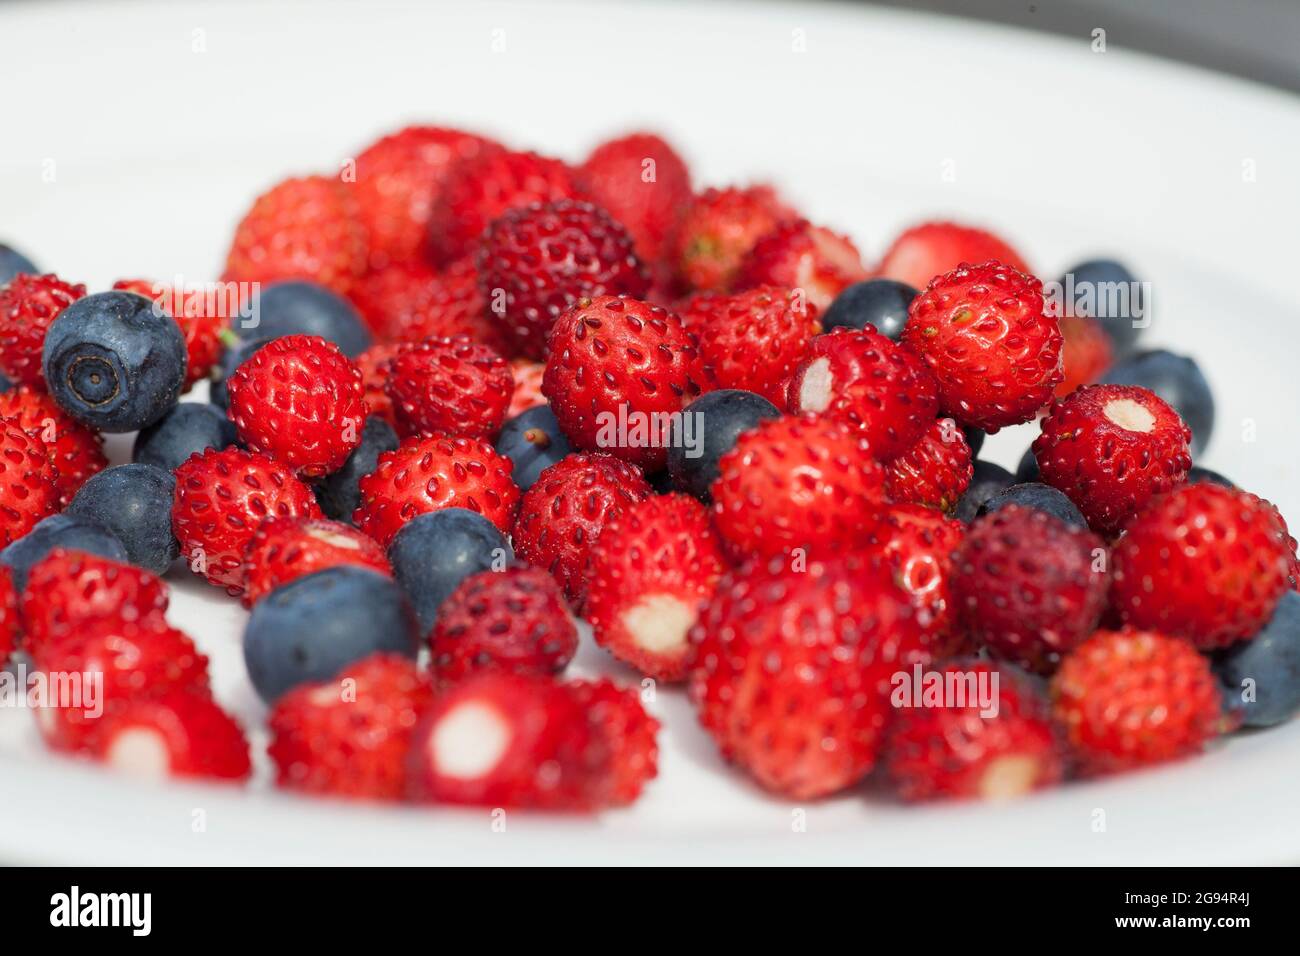 Wild Strawberry and blueberry freshly picked for breakfast Stock Photo